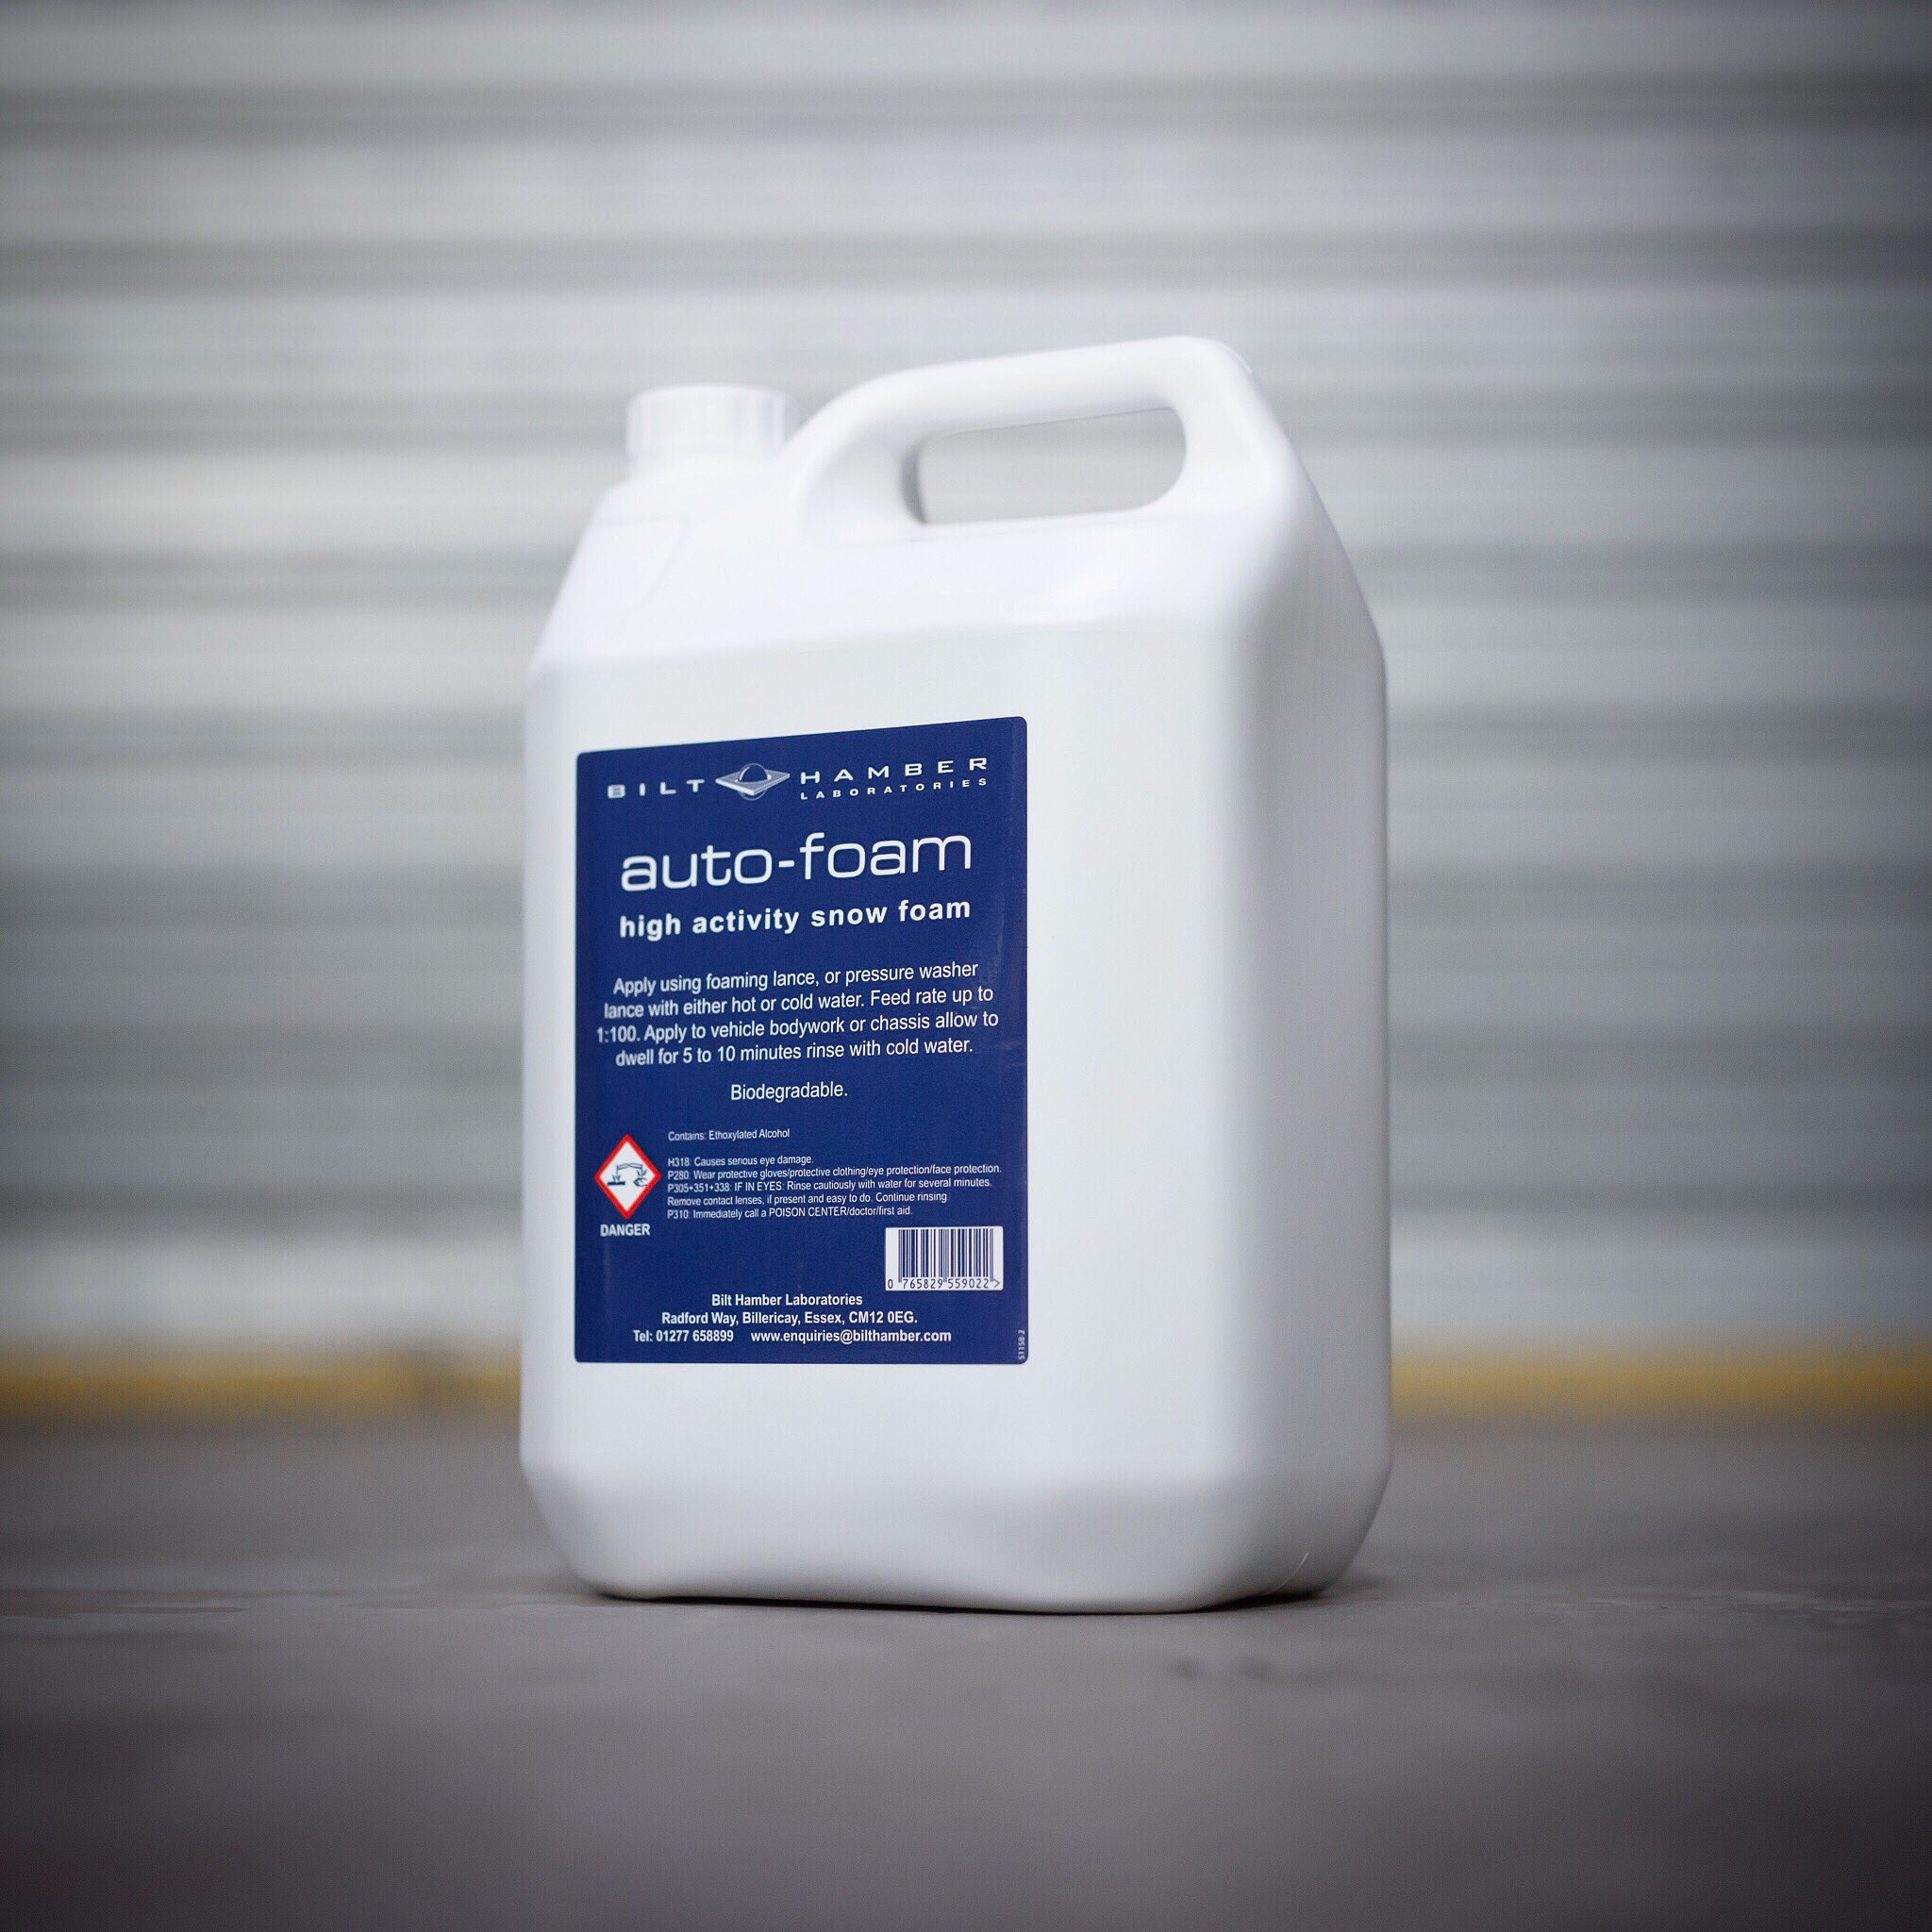 Polished Bliss on X: Great review of Bilt Hamber auto-foam by David F. -  “Tried many different types of foam over the years and this seems the best  at actually cleaning. It